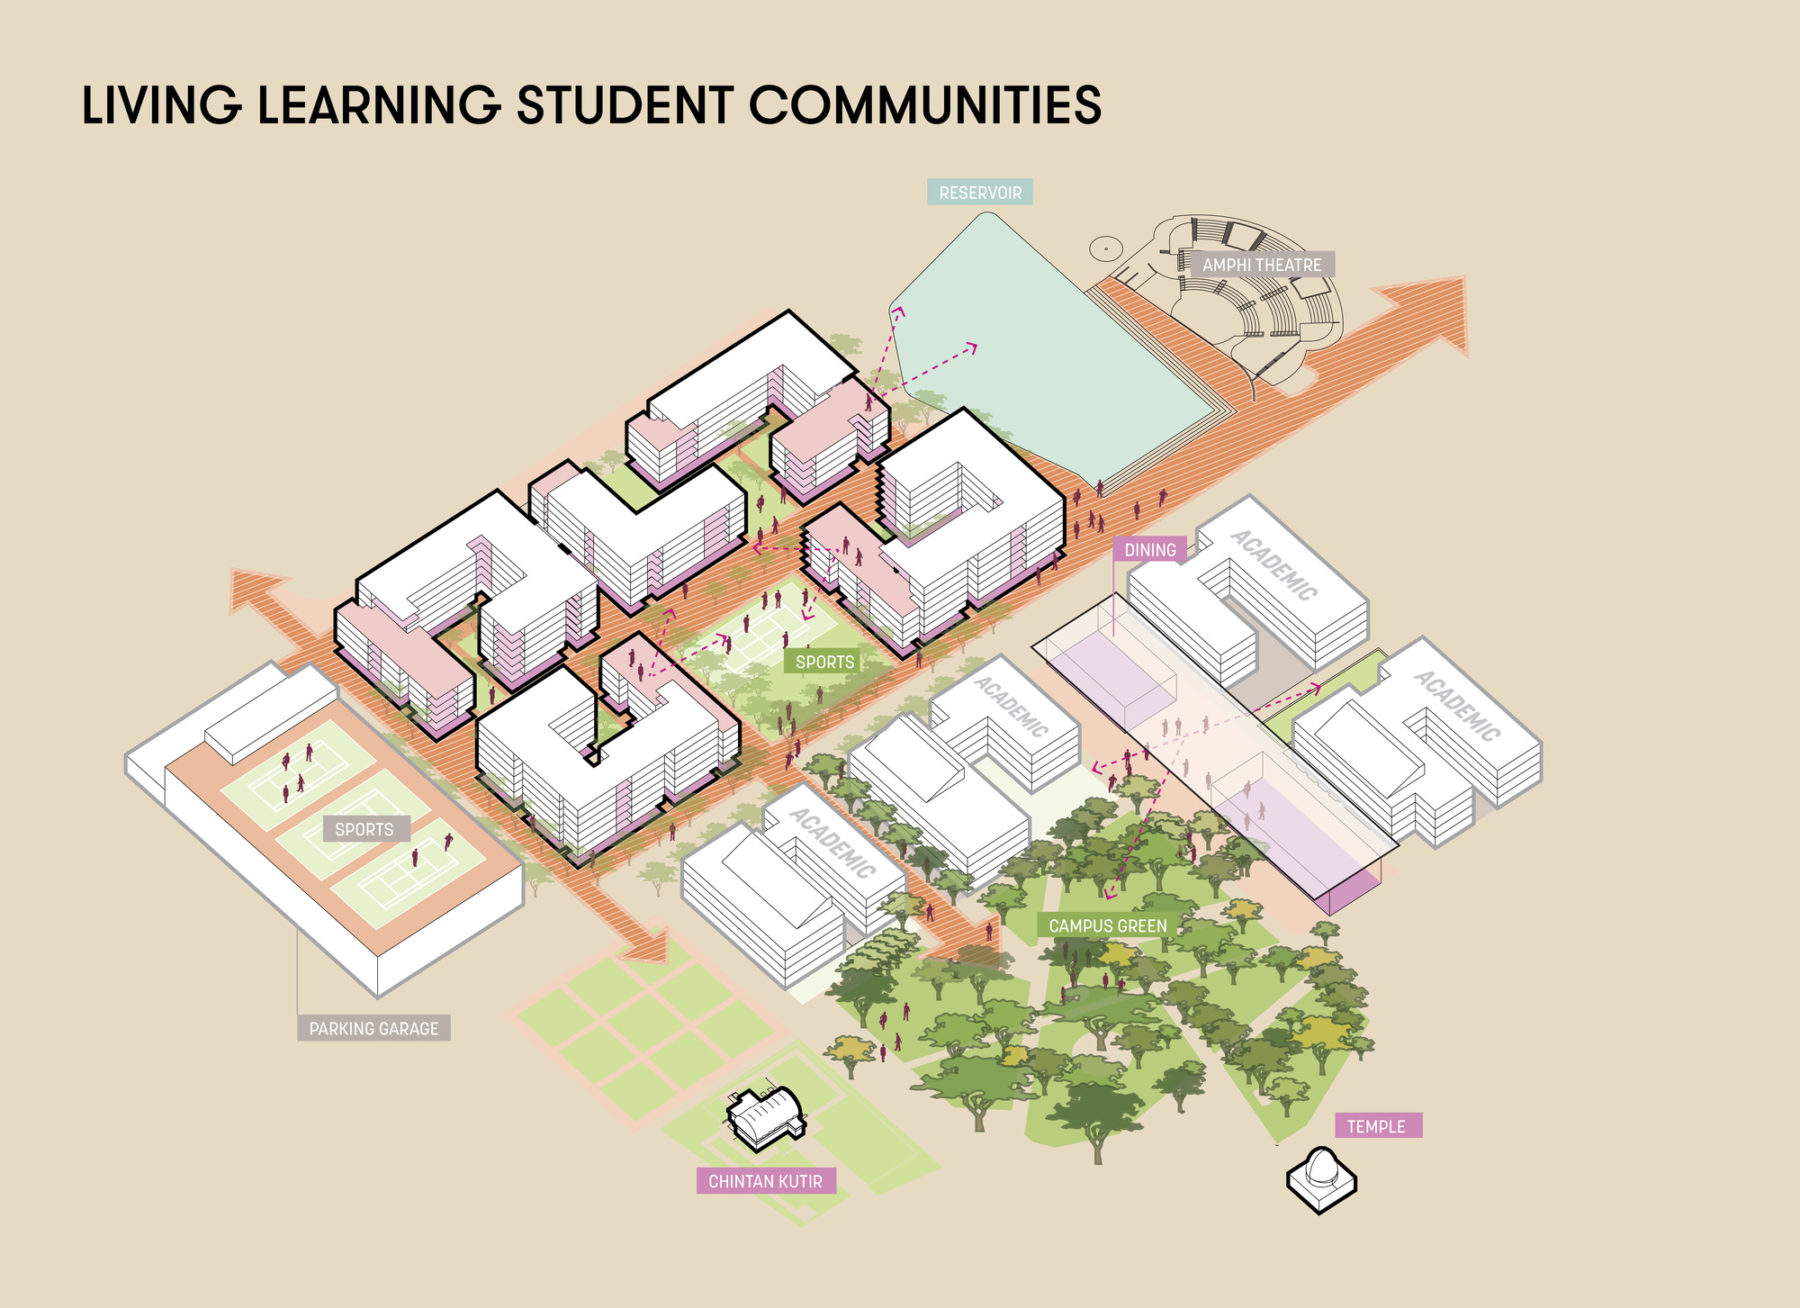 Living learning student communities